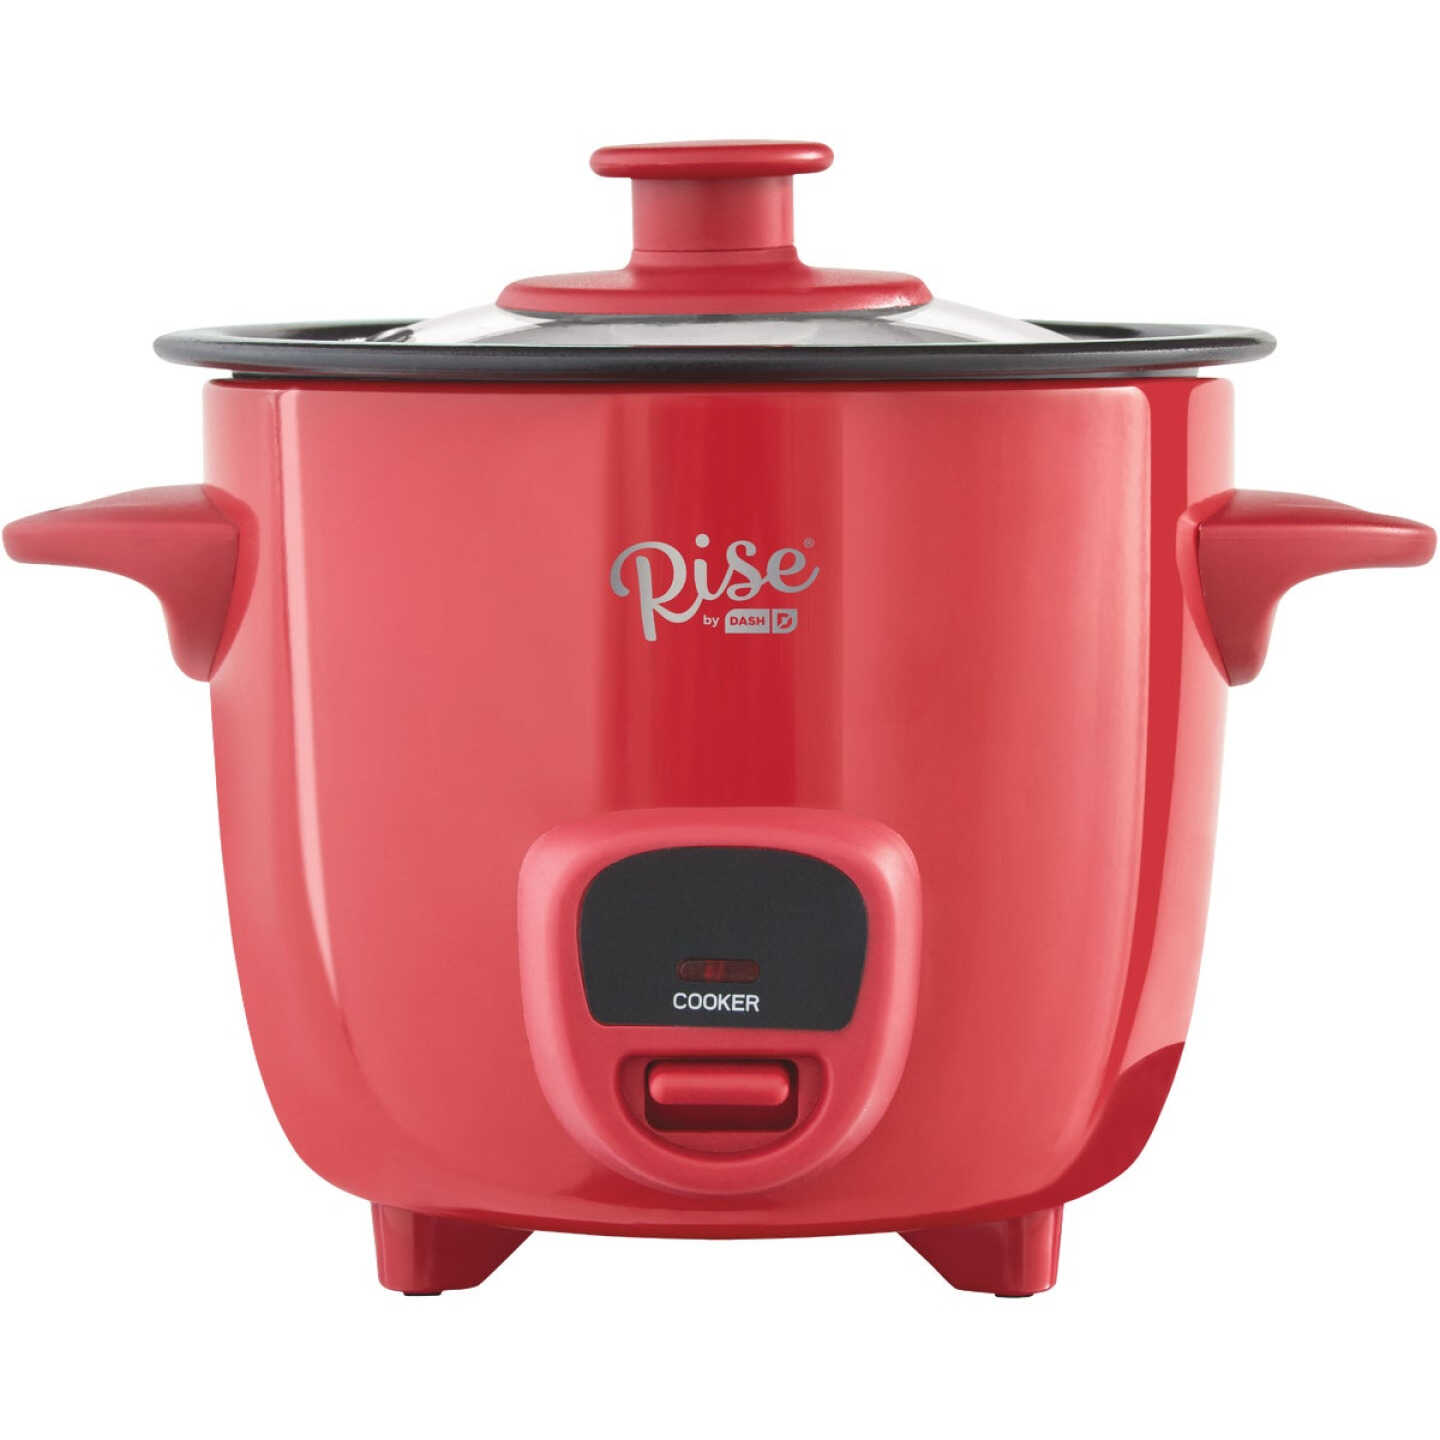 Rice cooker oster - household items - by owner - housewares sale